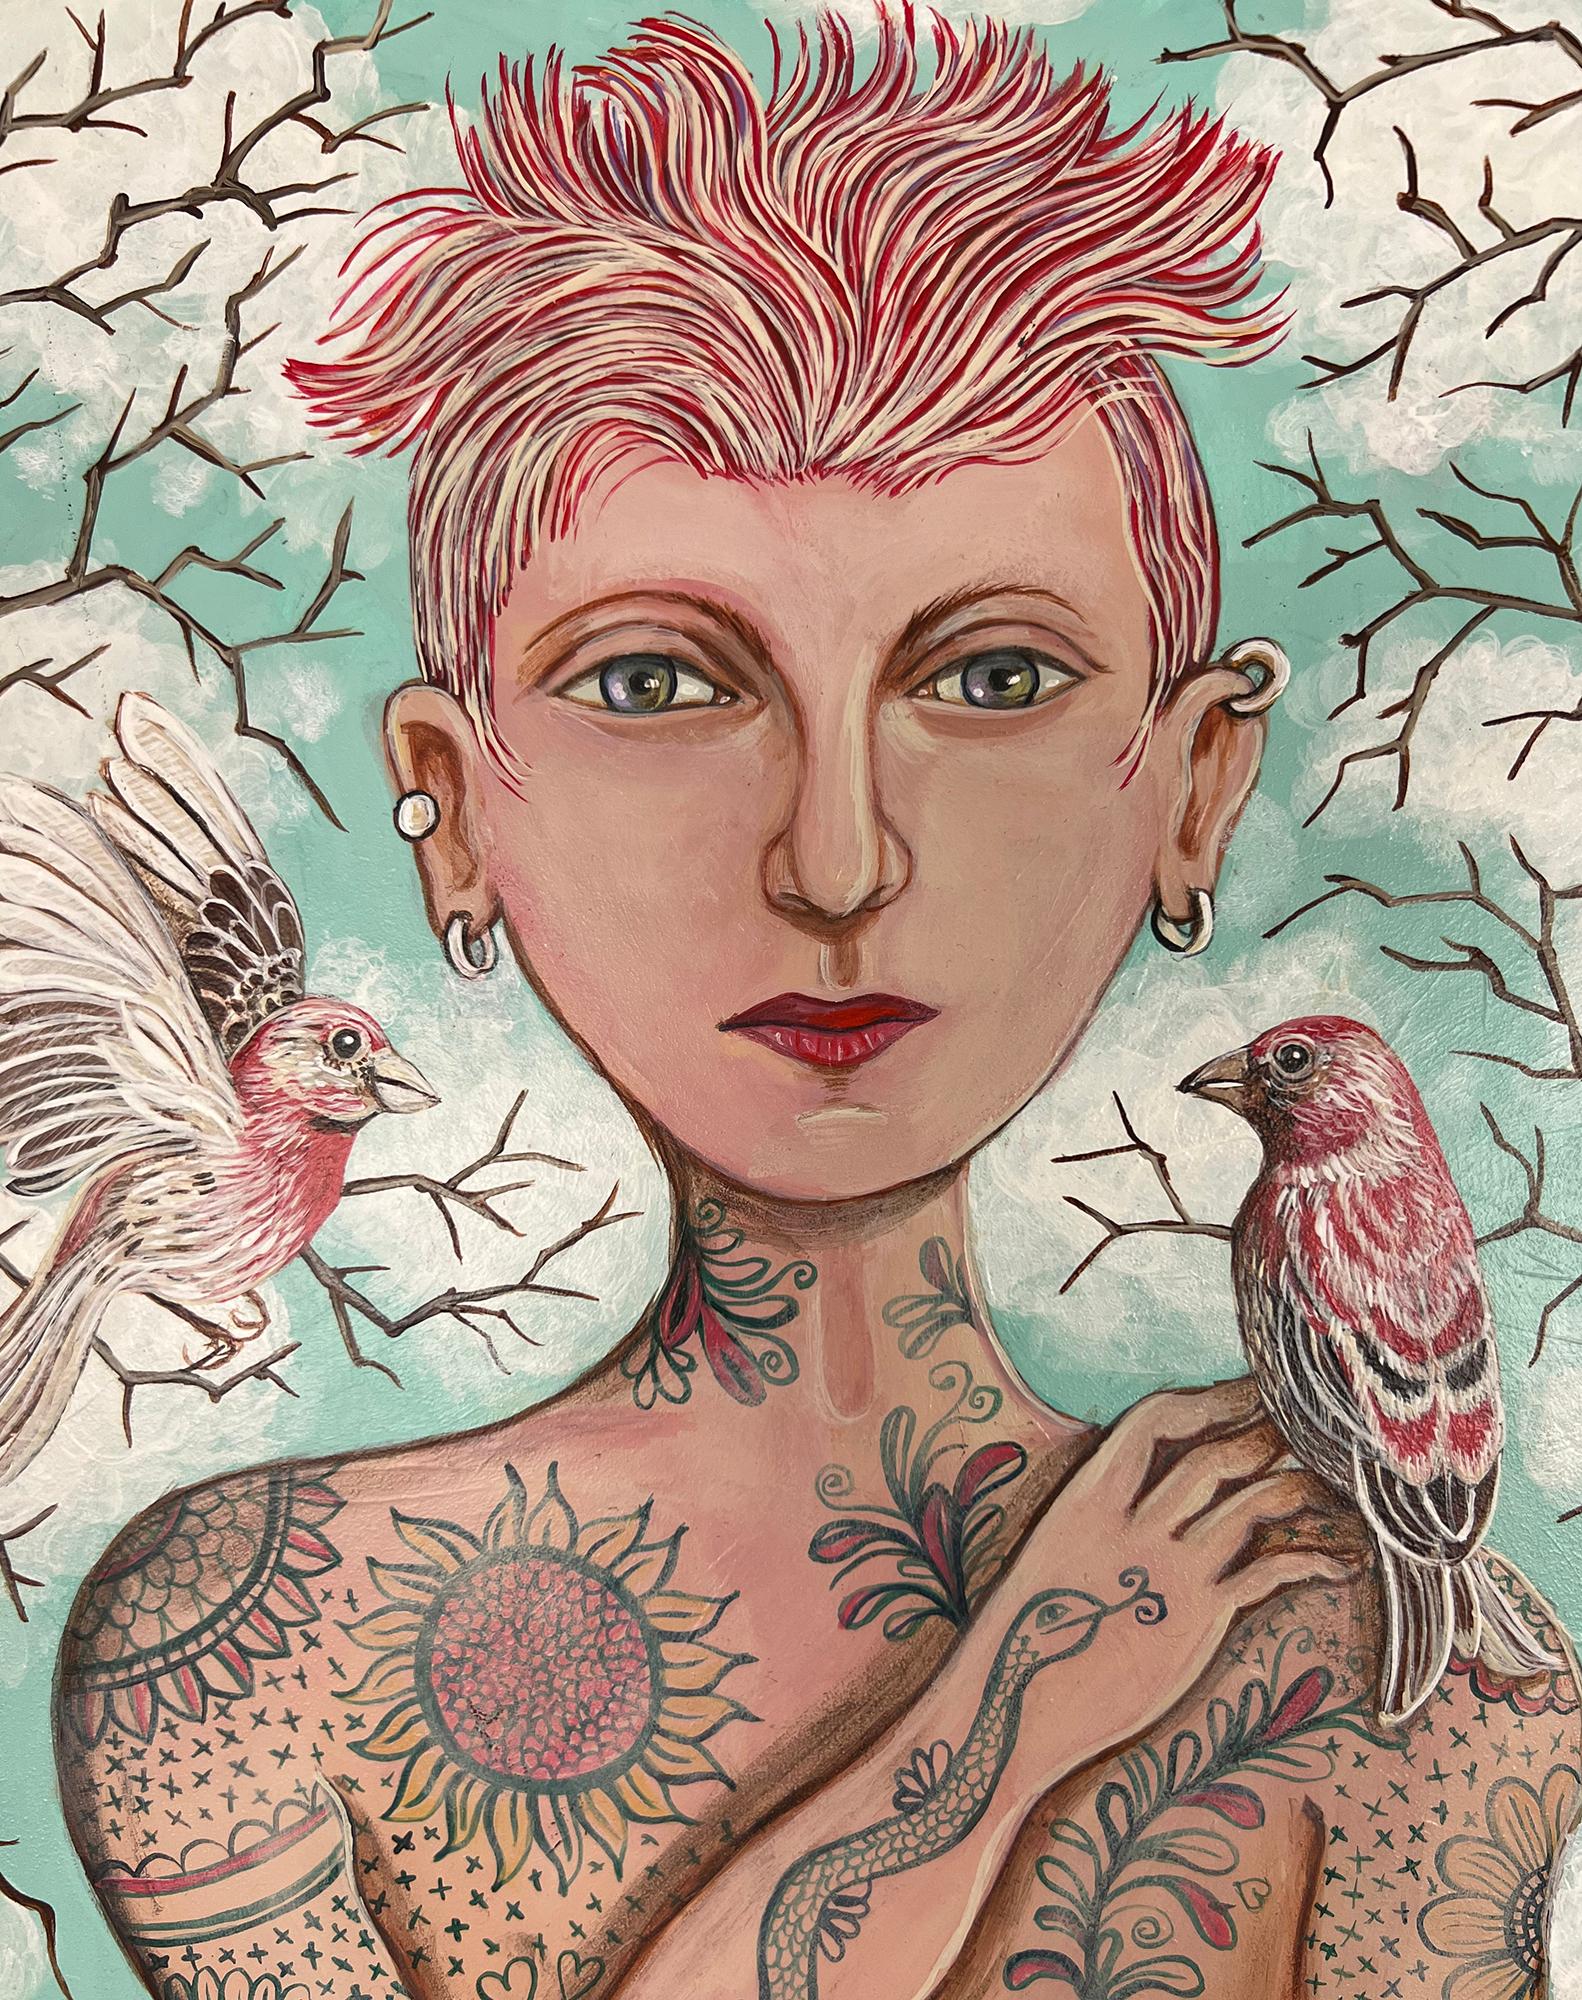 <p>Artist Comments<br>Artist Johansen Newman presents a contemporary portrait of a young tattooed woman. Her fiery red locks draw the viewer's attention to her contemplative face. She stands in the open air among leafless branches and friendly